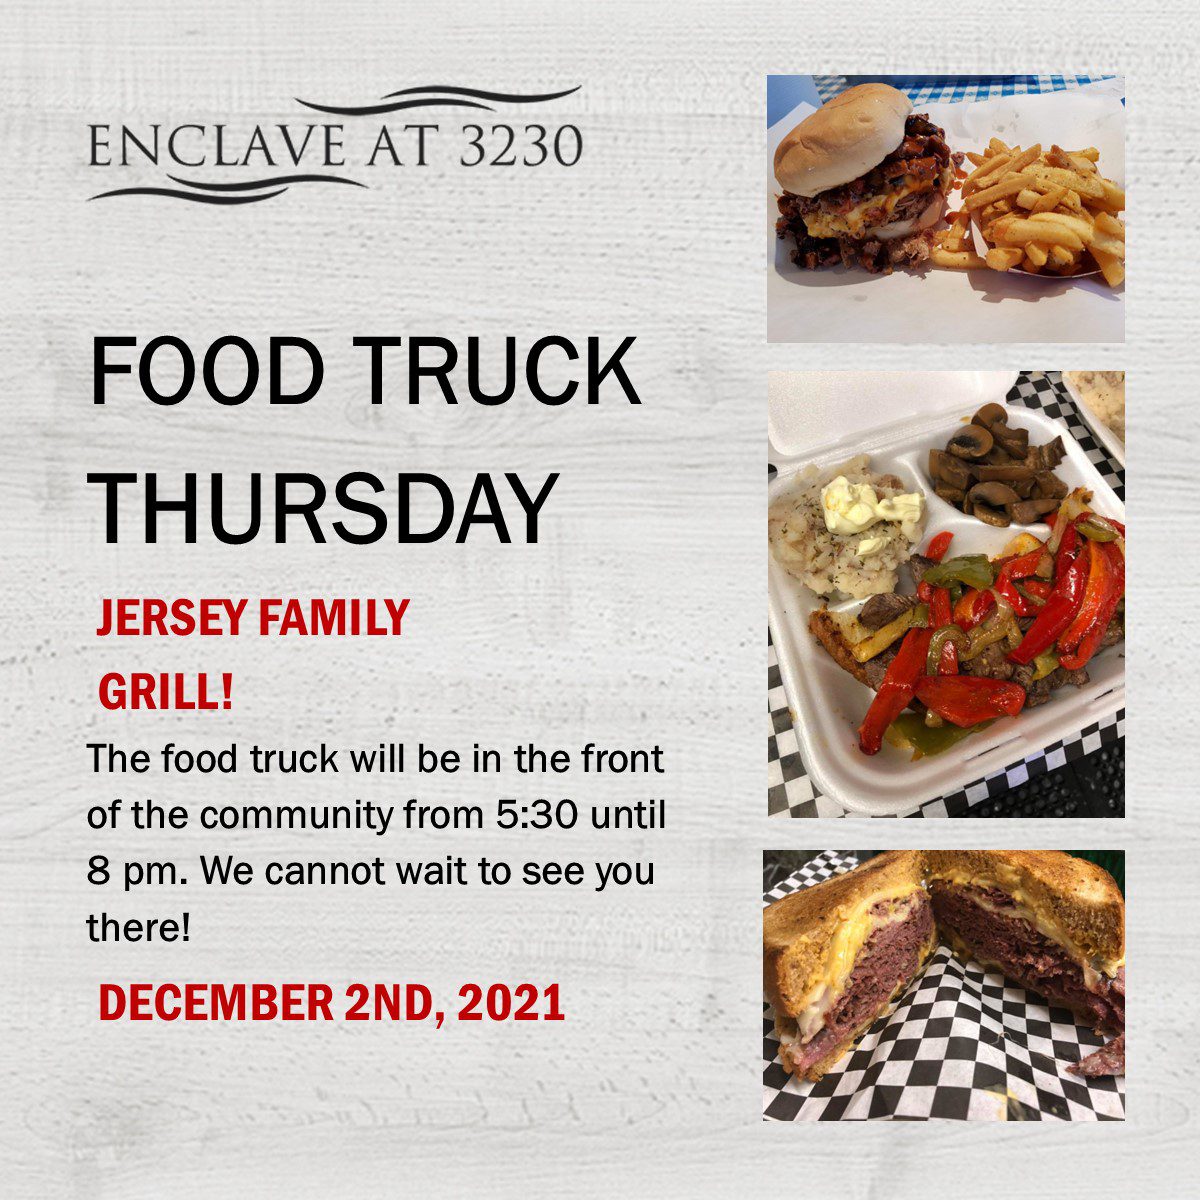 Jersey Family Grill at Enclave at 3230 in Daytona Beach